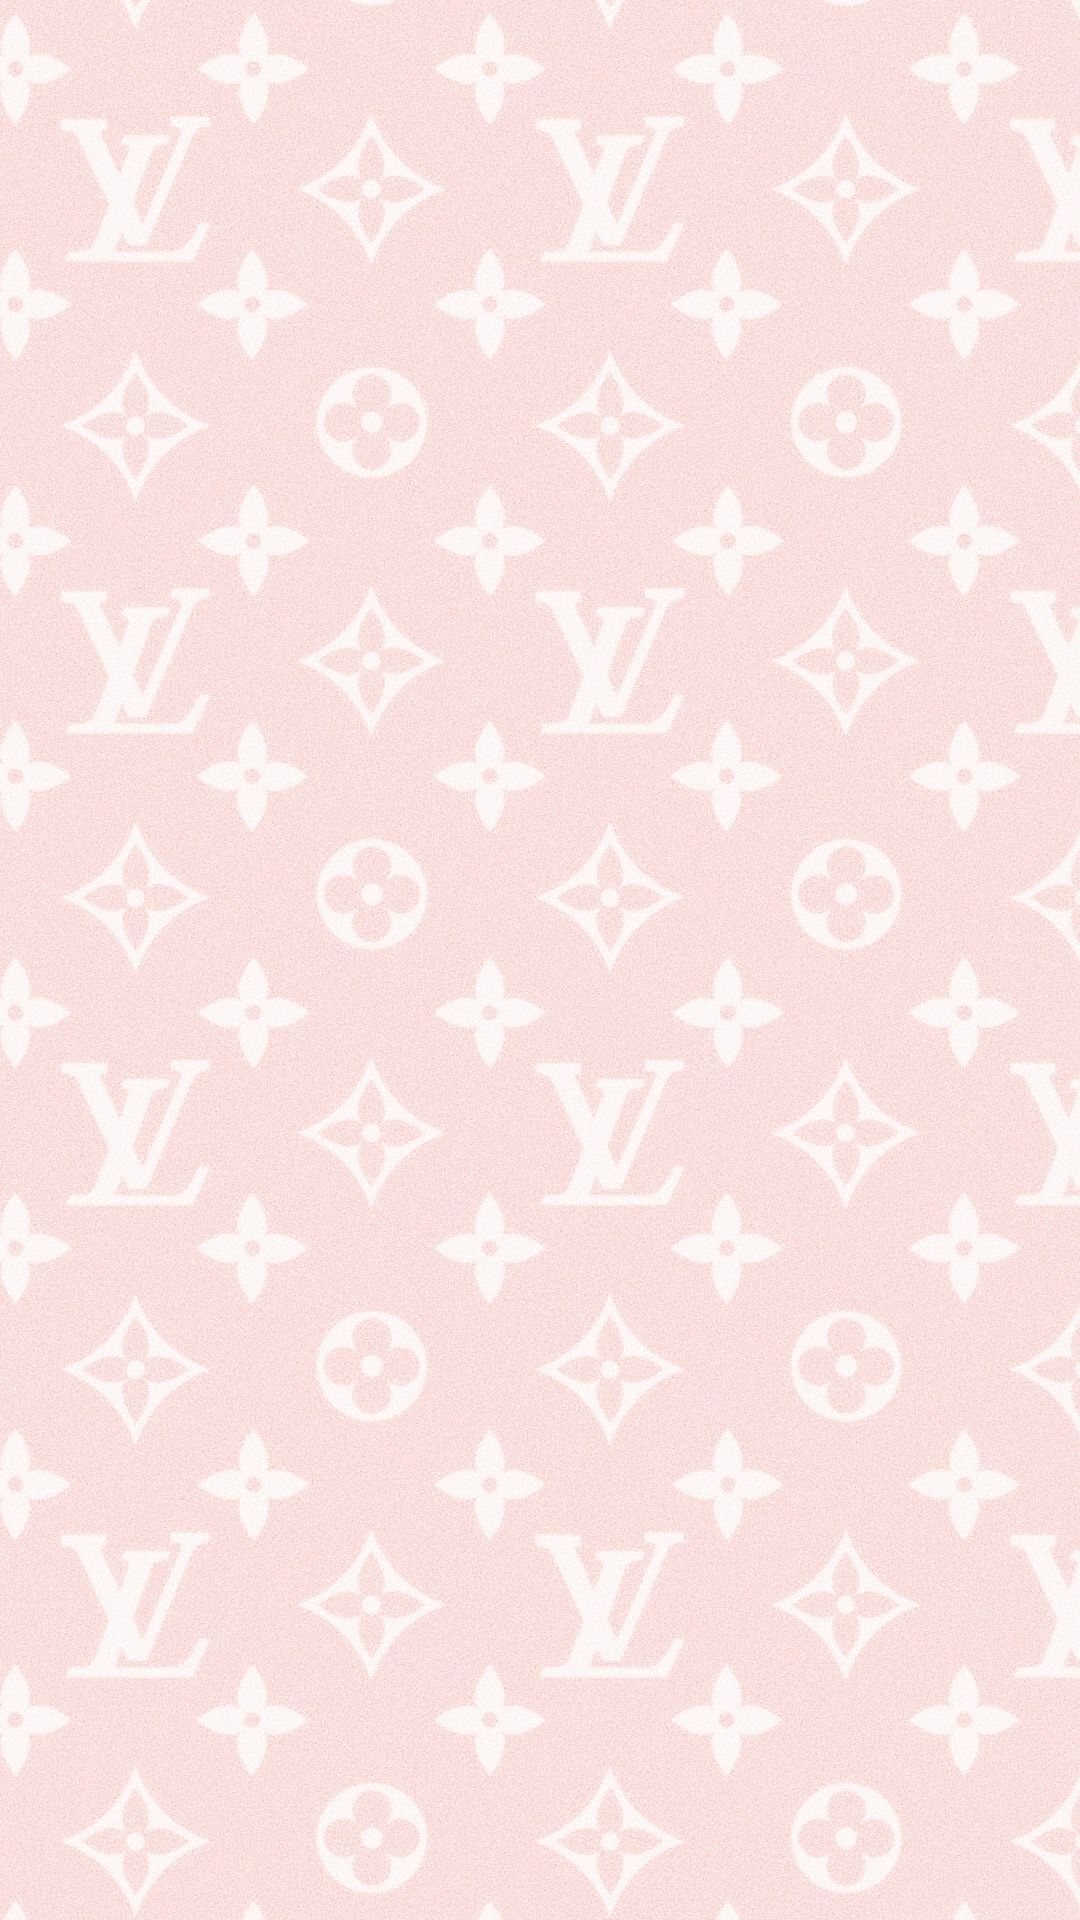 Louis Vuitton Aesthetic Wallpapers - Wallpaper Cave